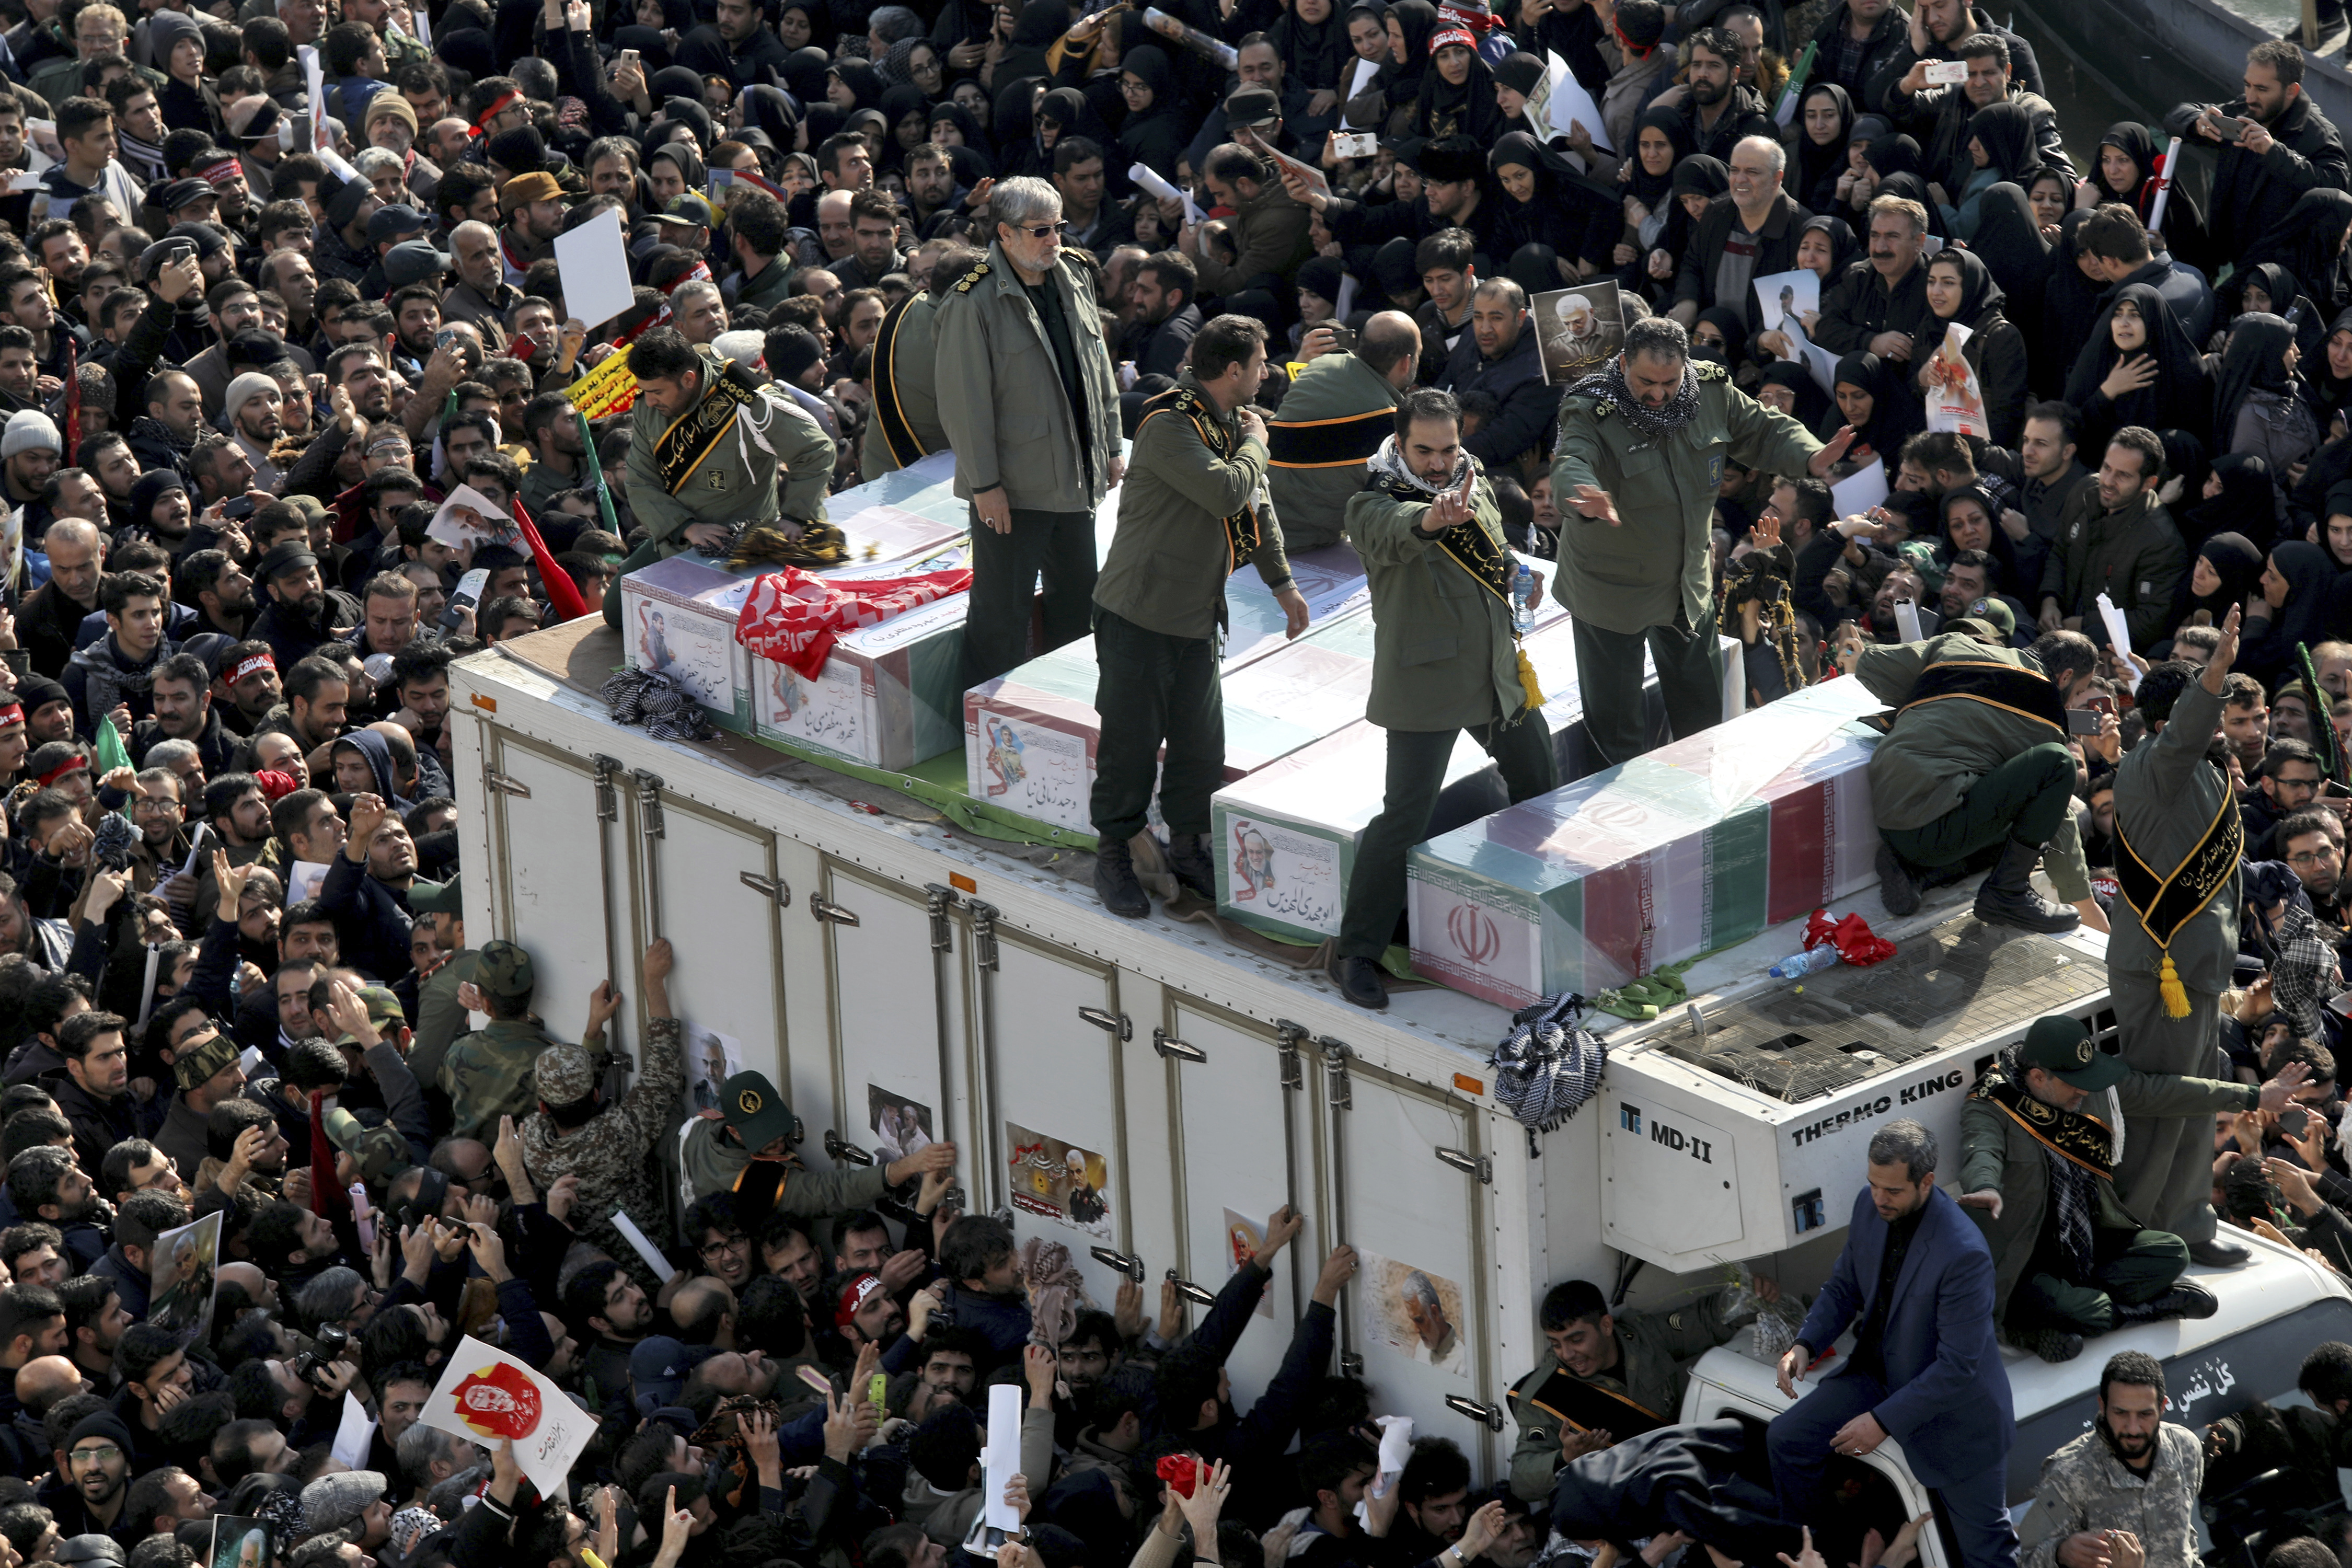 Coffins of Gen. Qassem Soleimani and others who were killed in Iraq by a U.S. drone strike, are carried on a truck surrounded by mourners during a funeral procession at the Enqelab-e-Eslami (Islamic Revolution) square in Tehran, Iran, Monday, Jan. 6, 2020. The processions mark the first time Iran honored a single man with a multi-city ceremony. Not even Ayatollah Ruhollah Khomeini, who founded the Islamic Republic, received such a processional with his death in 1989. Soleimani on Monday will lie in state at Tehran's famed Musalla mosque as the revolutionary leader did before him. (AP Photo/Ebrahim Noroozi)